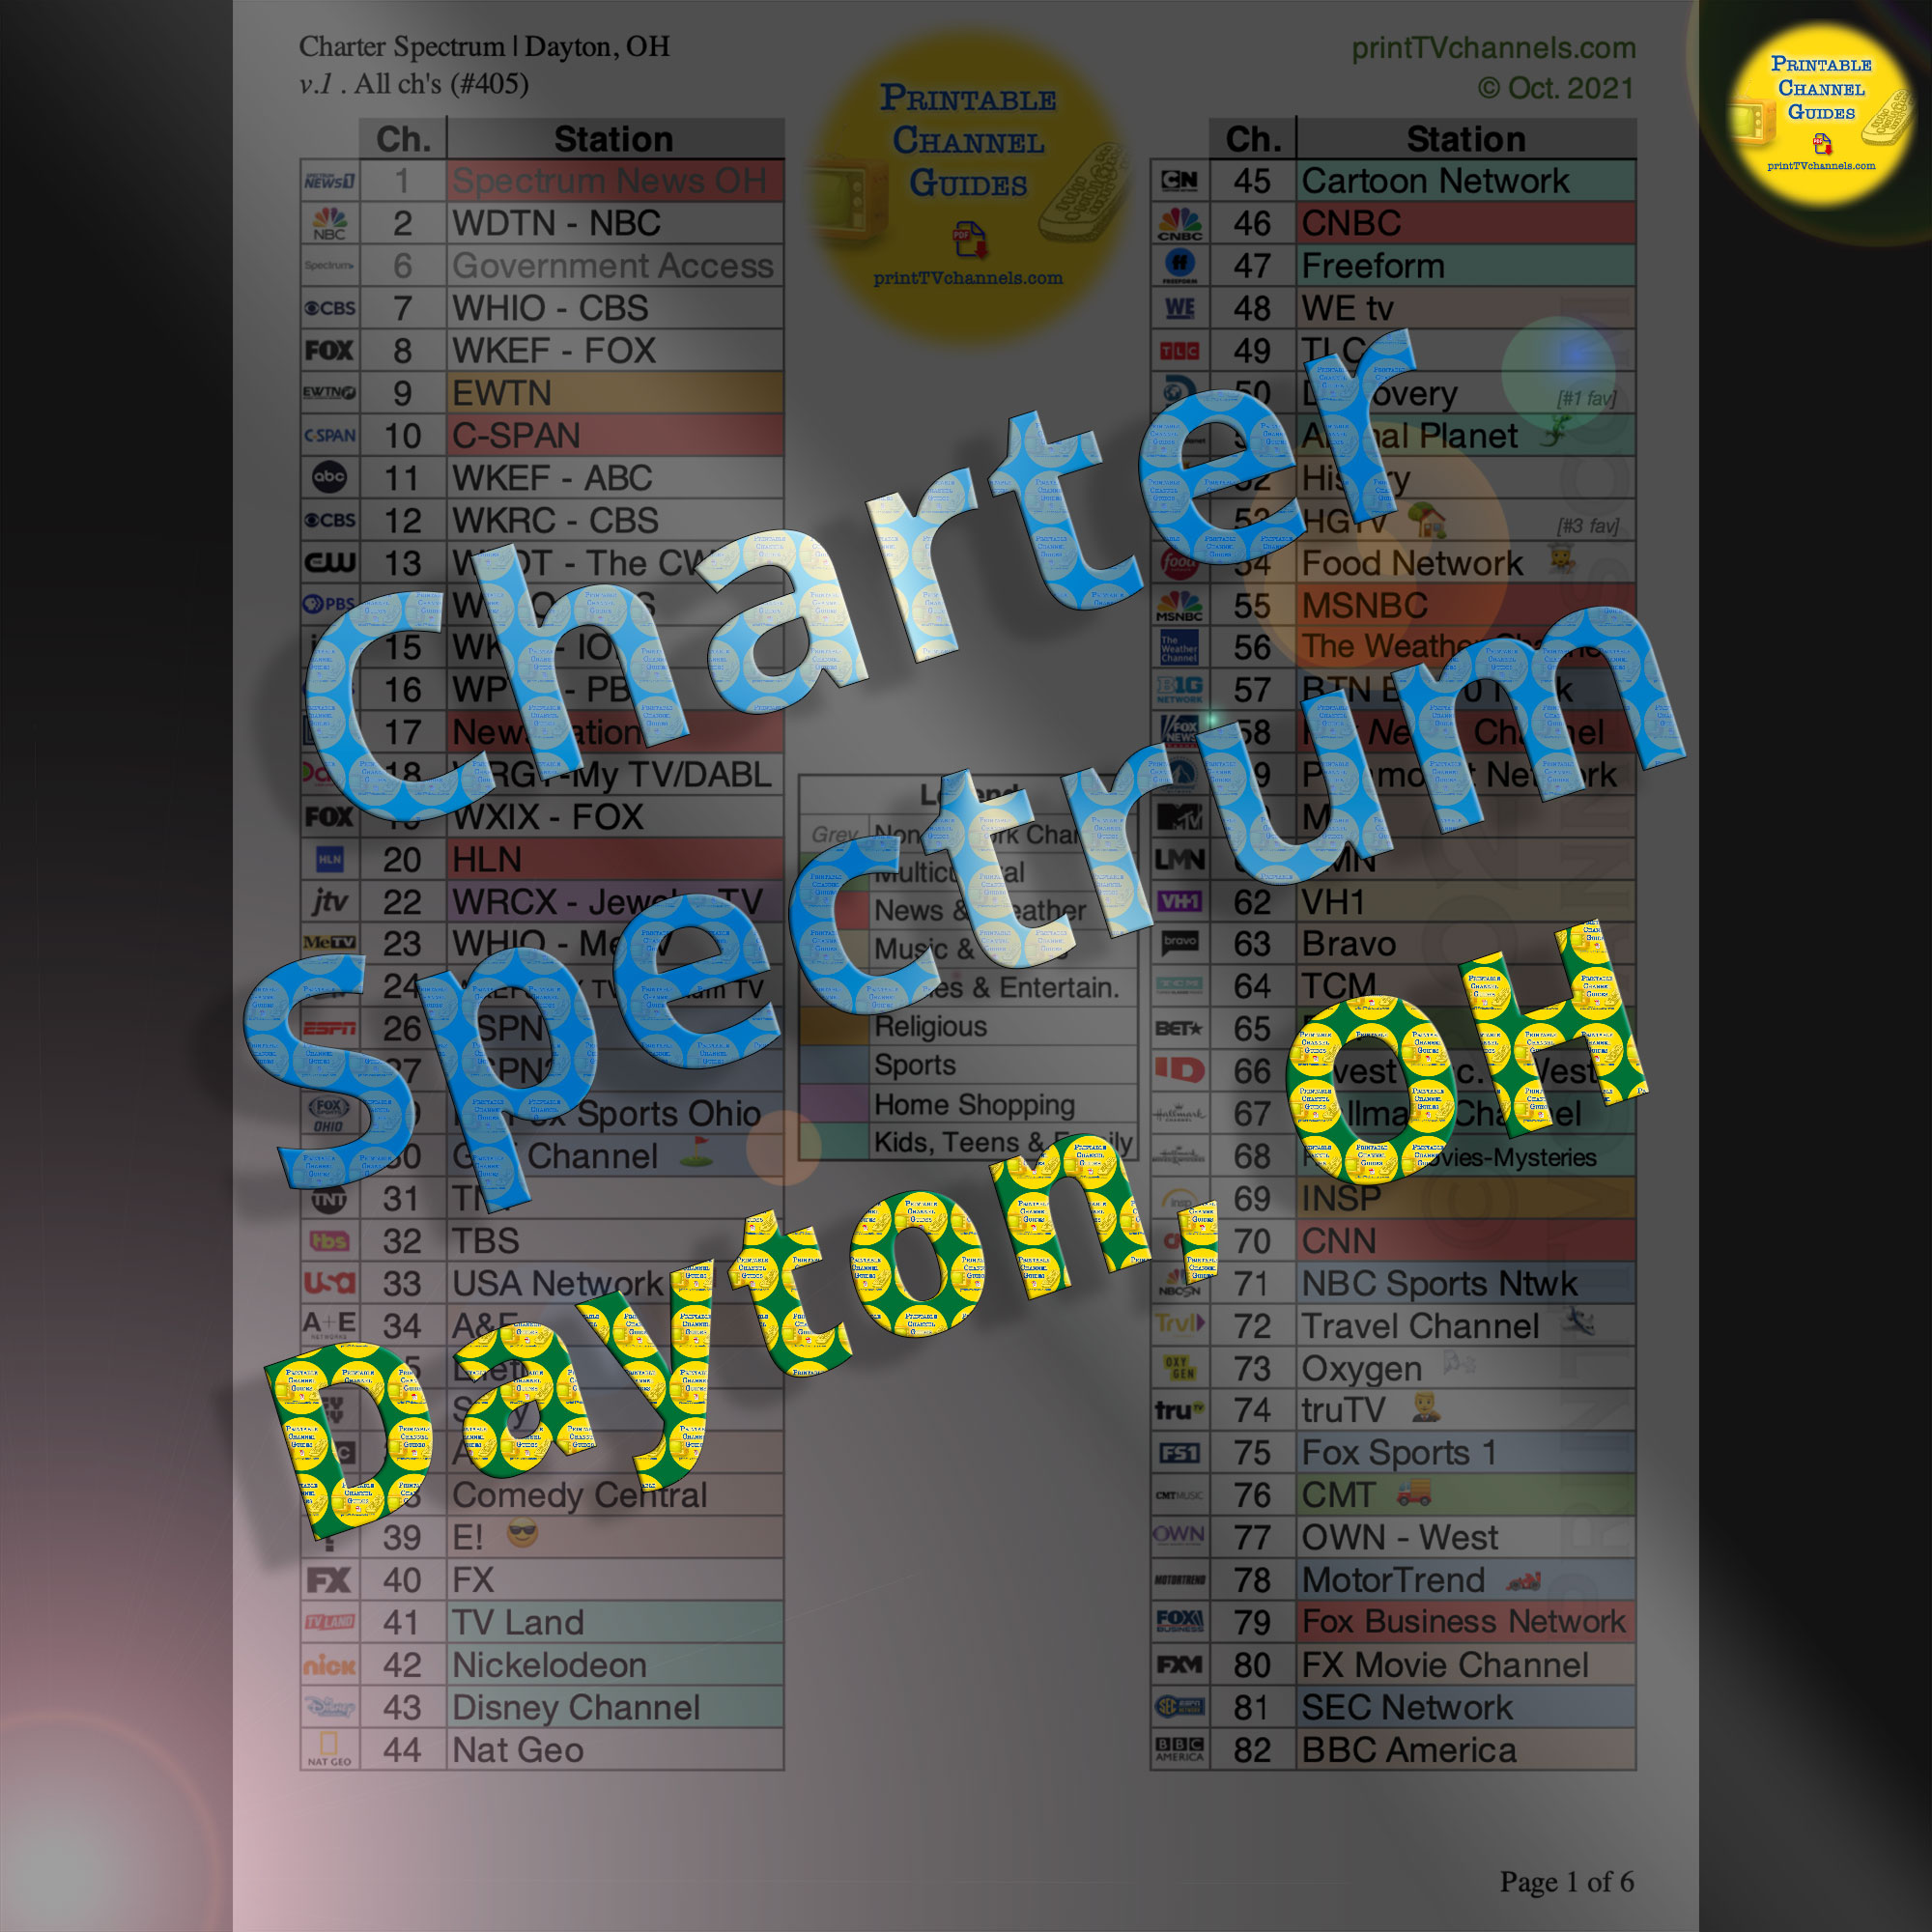 Preview Image: Printable Charter Spectrum channel lineup guide for Dayton, OH. All 405 channels are listed, including local stations. Stations are arranged numerically, by increasing channel number. This free PDF download is search-friendly so you can easily look up channels. Color coded by TV station genre. Surrounding areas: Englewood, Harrison, Huber Heights (all in Miami Valley, OH). v.1 Created October 2021.